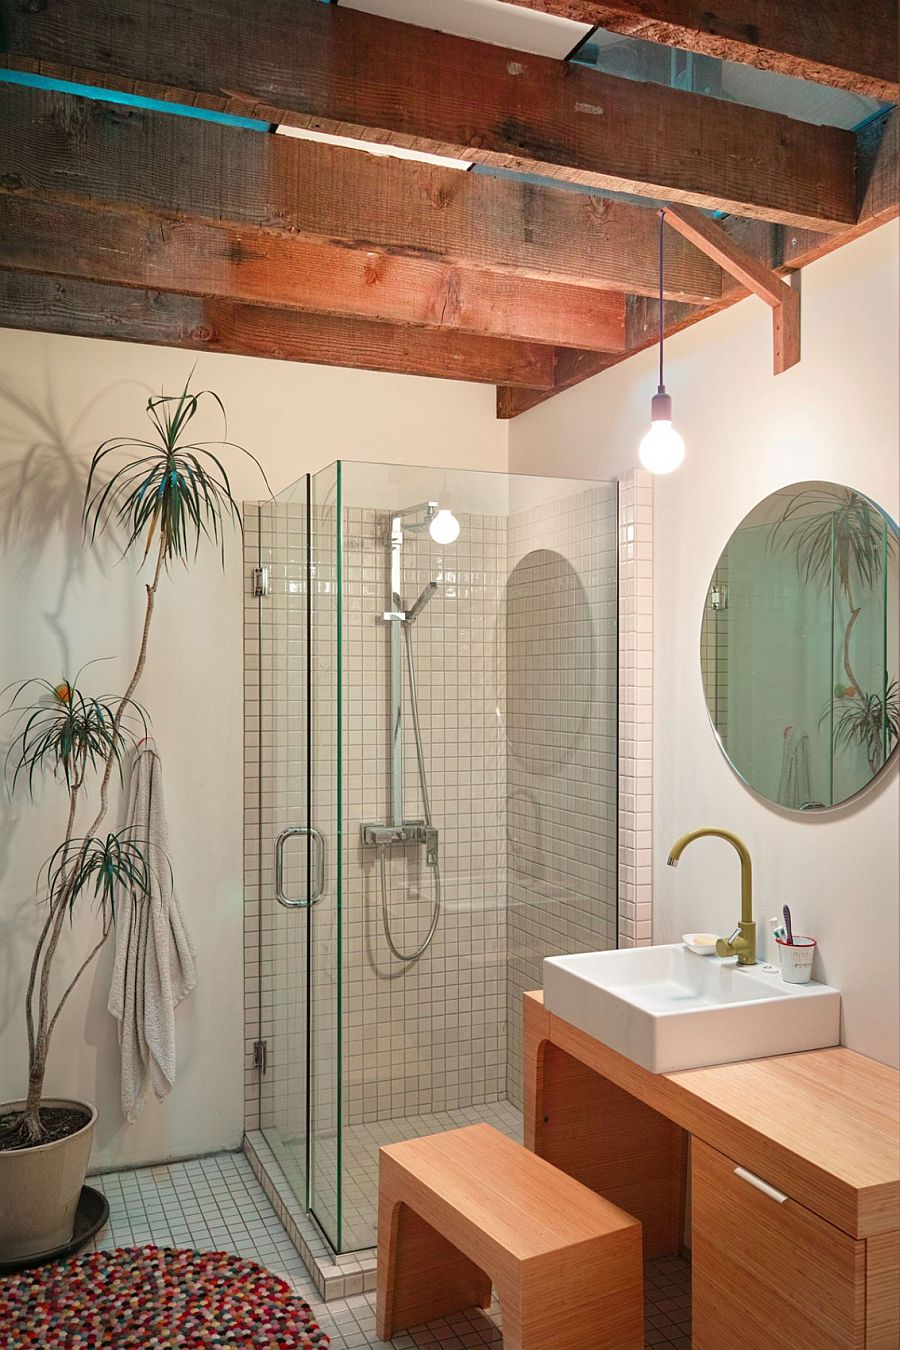 Small corner shower area with a potted plant next to it